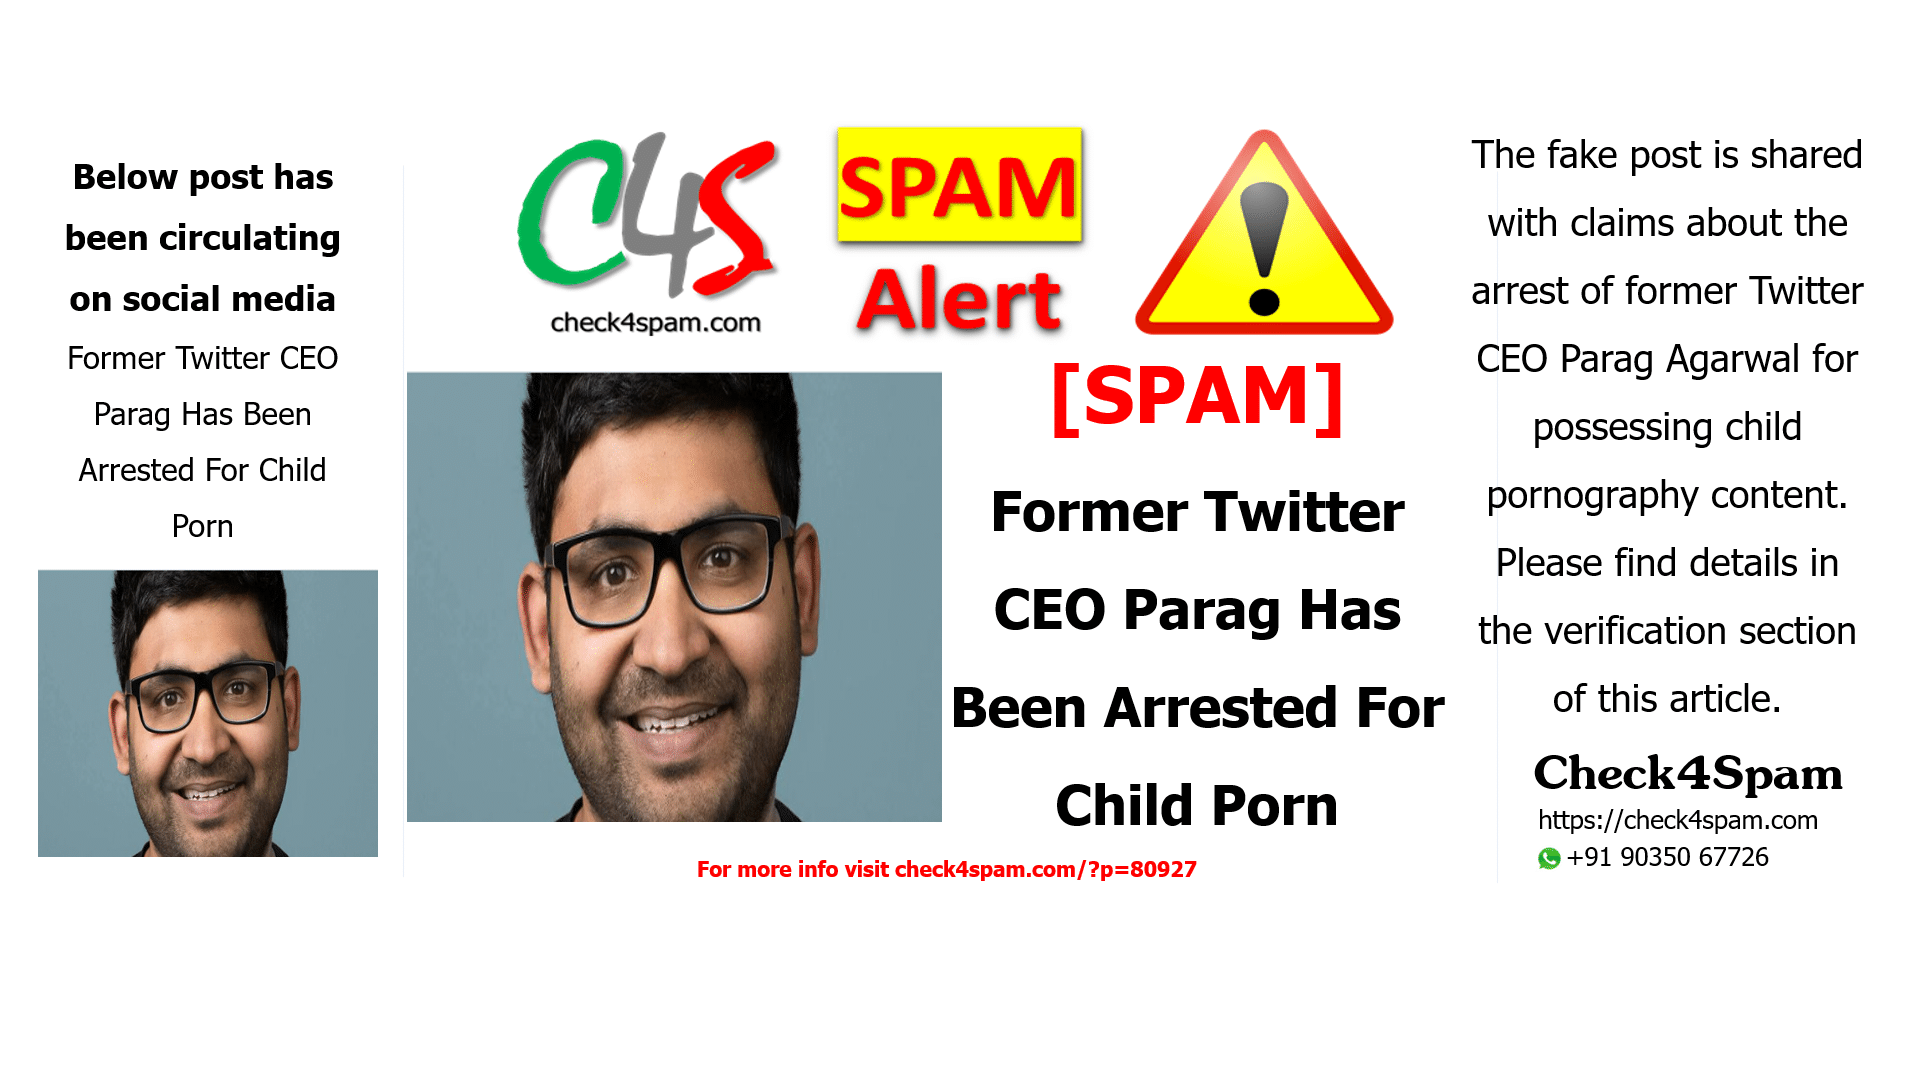 Former Twitter CEO Parag Has Been Arrested For Child Porn